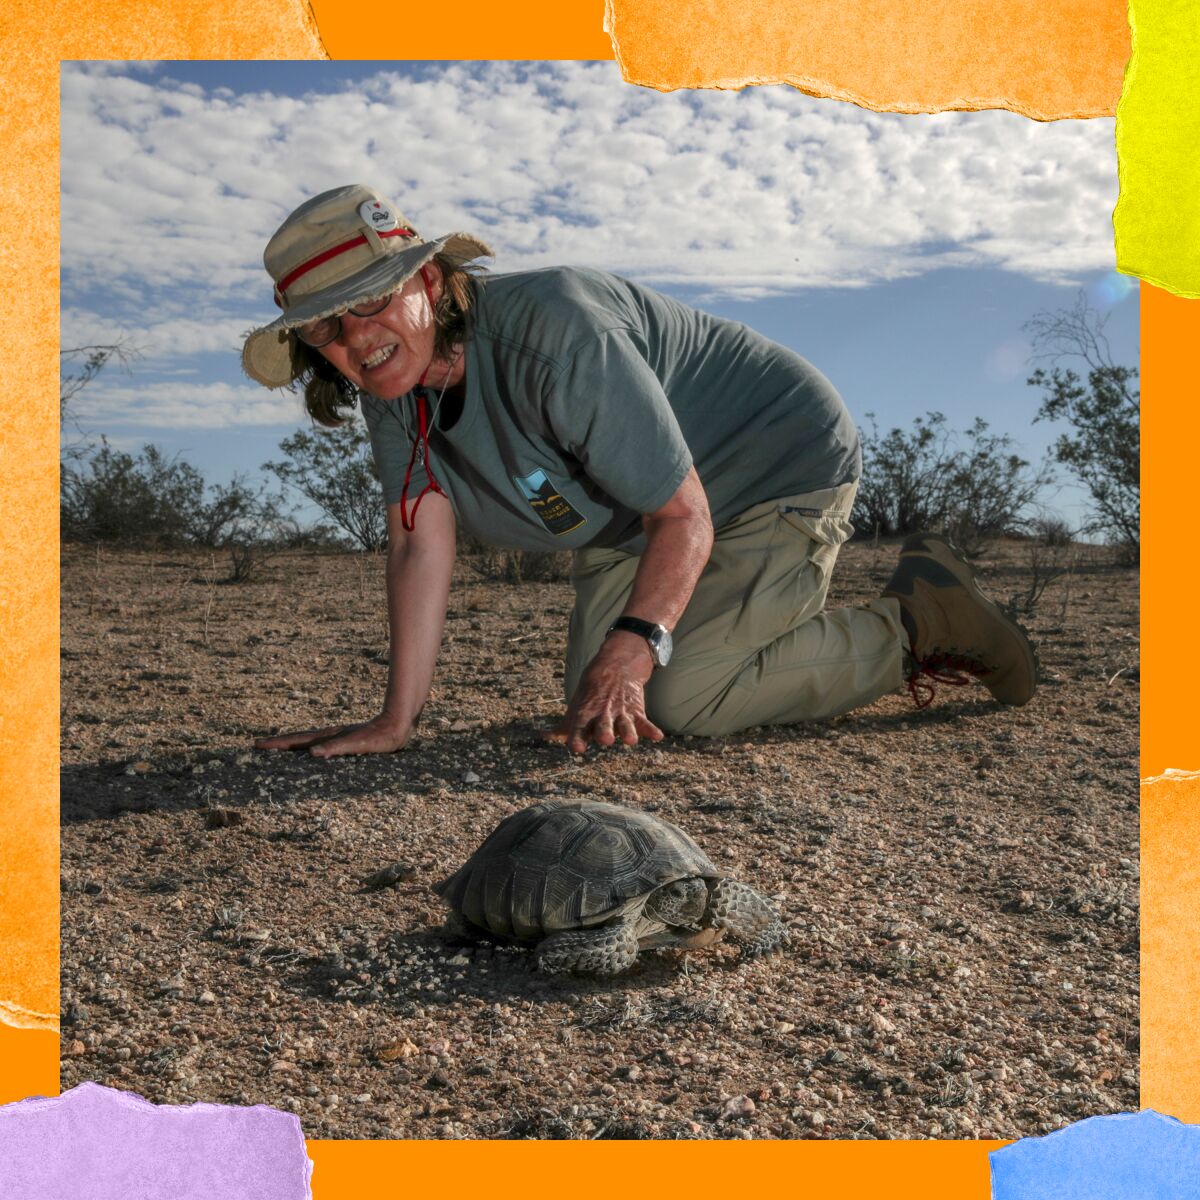 A woman wearing a bucket hat kneels on the ground next to a large tortoise.